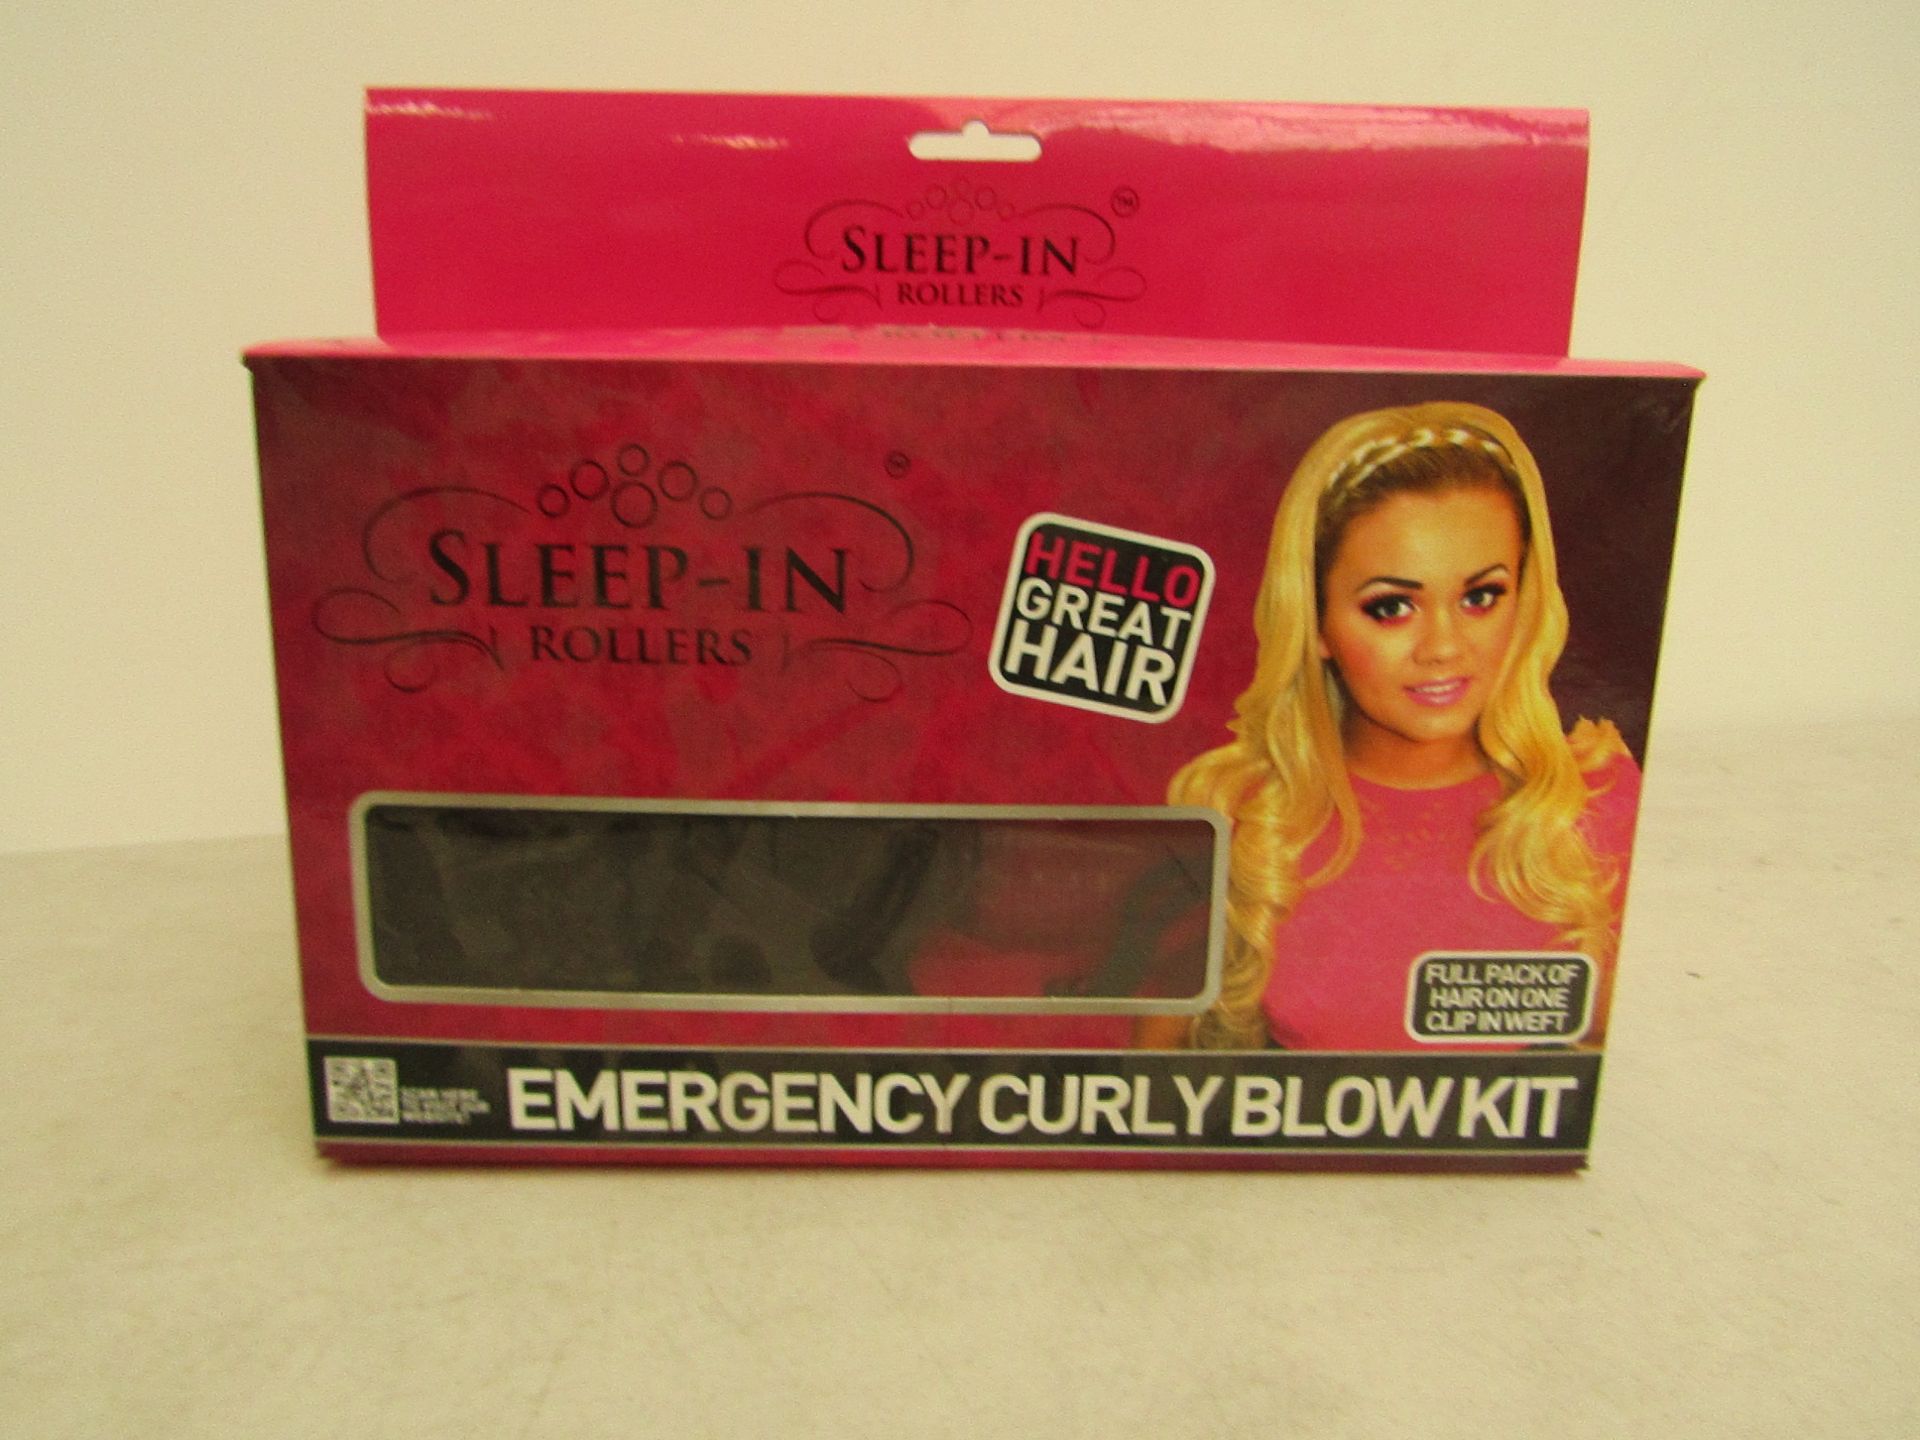 Emergency curly blow kit by 'Sleep-in rollers'. Pack contains full pack of Brown hair on one clip in